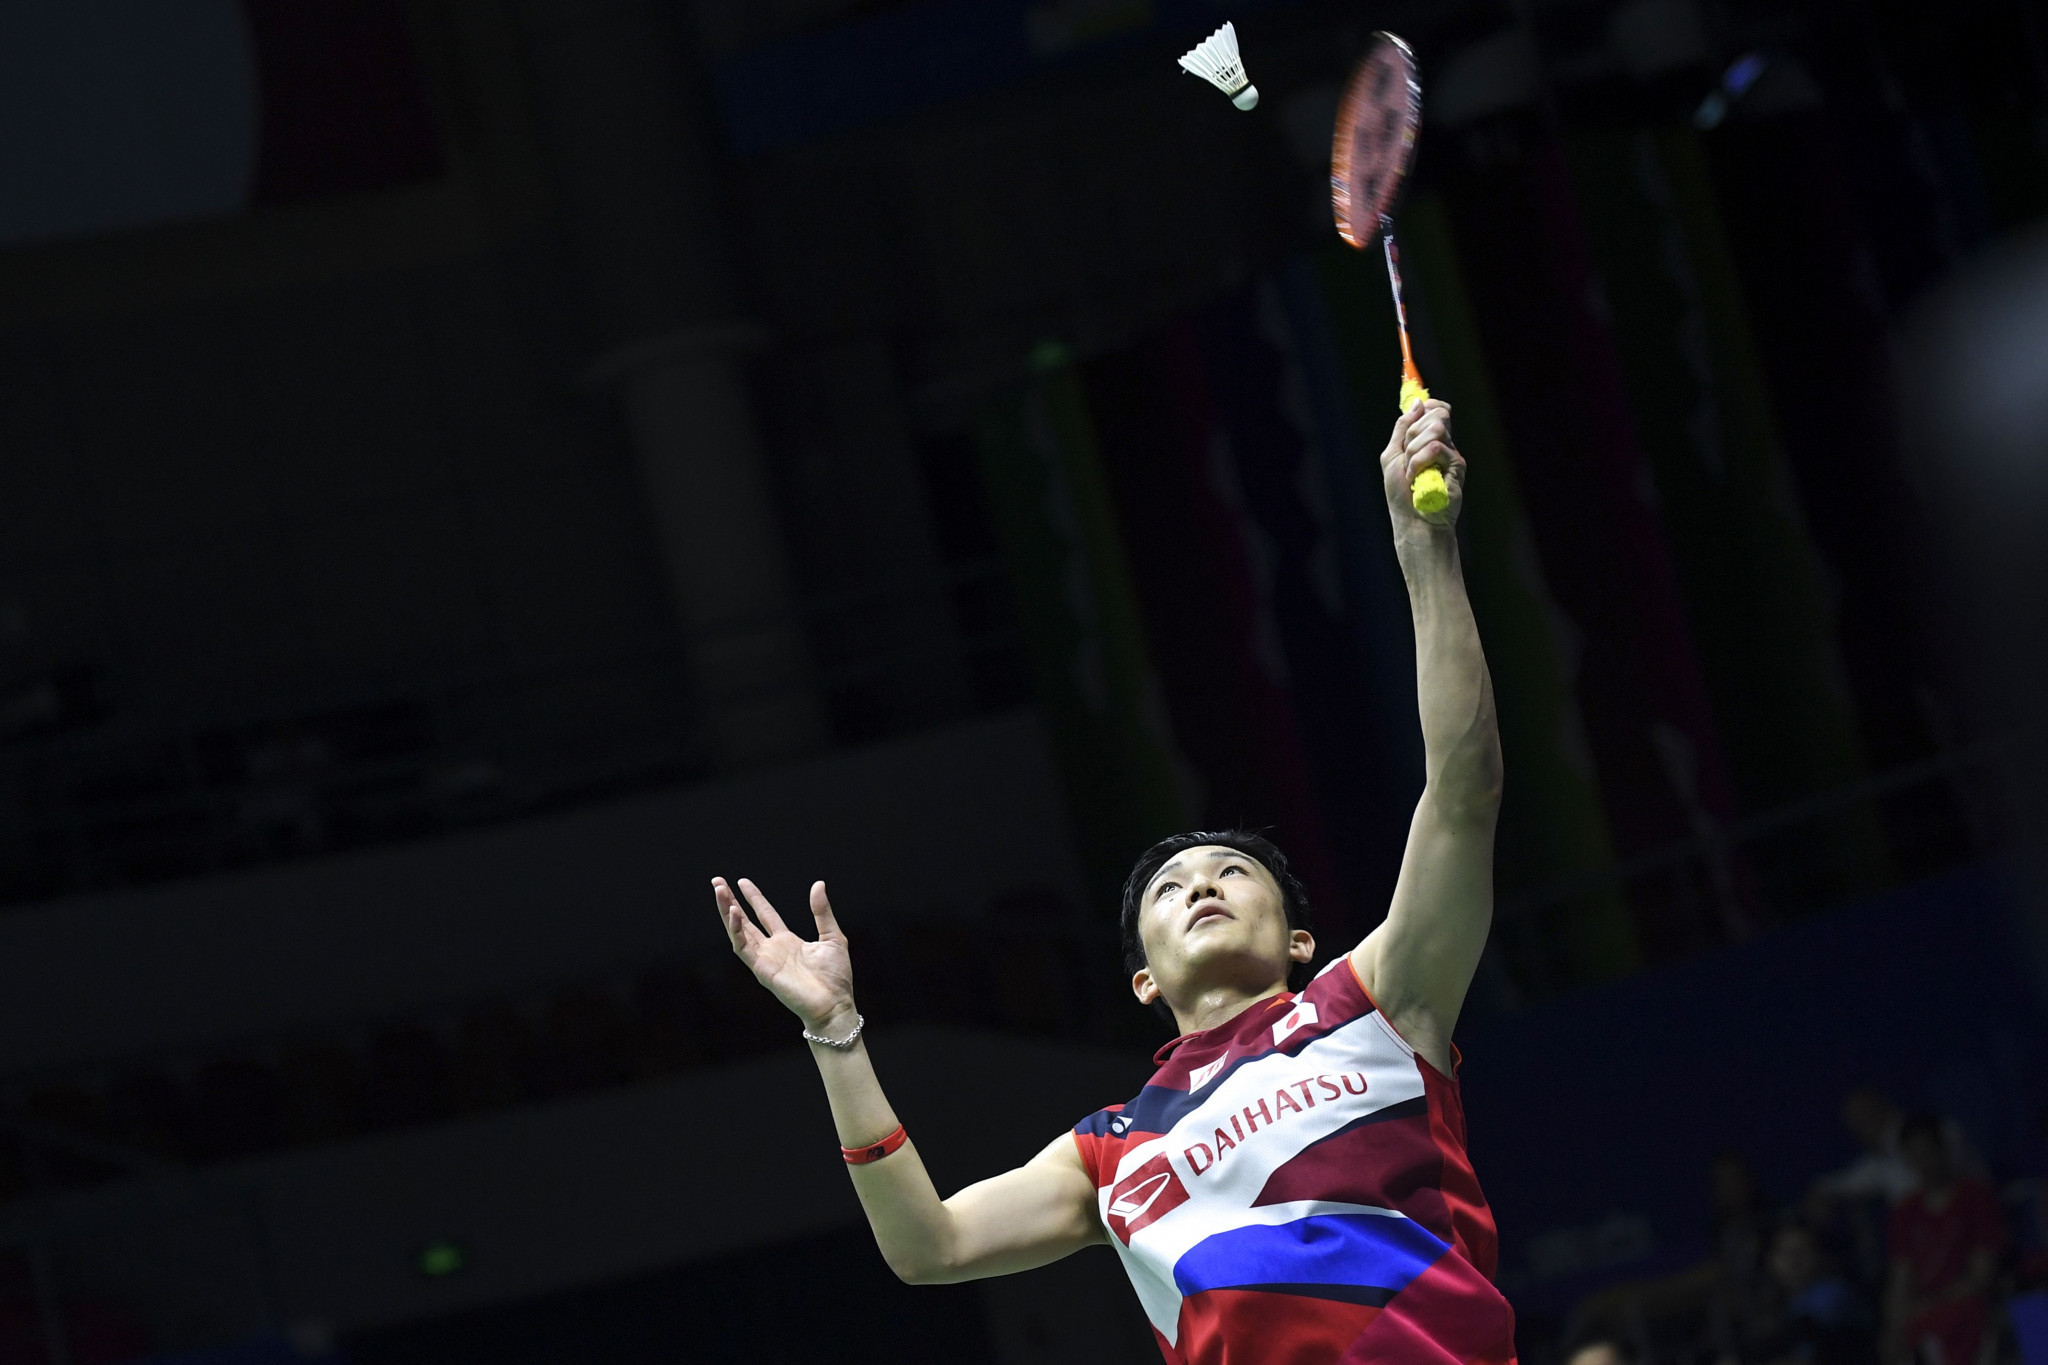 The Badminton World Federation has named M88 Mansion as its official betting partner ©Getty Images